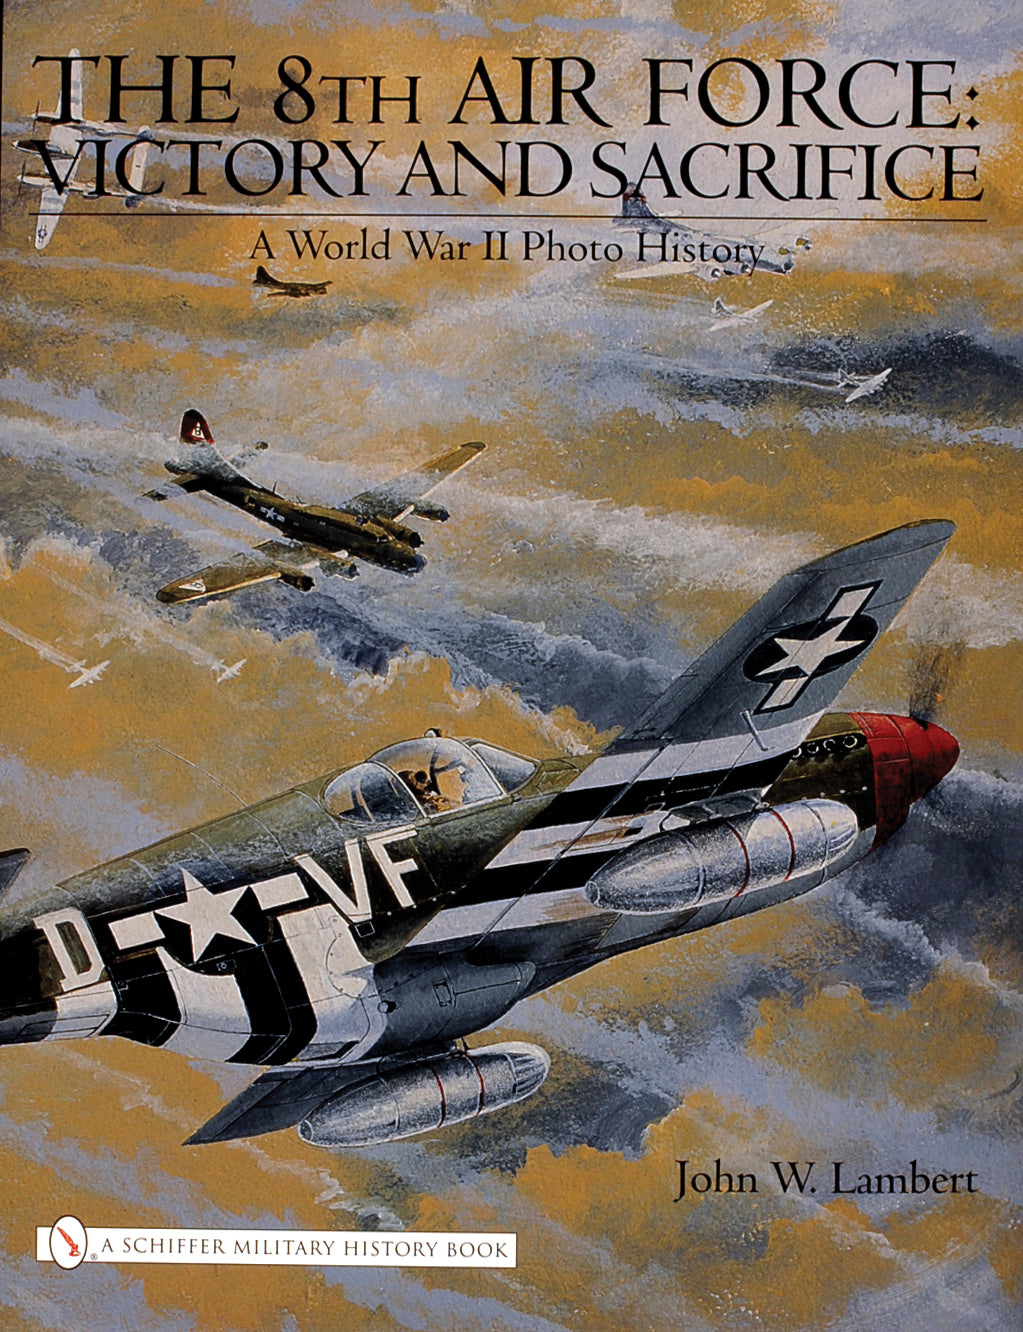 The 8th Air Force: Victory and Sacrifice